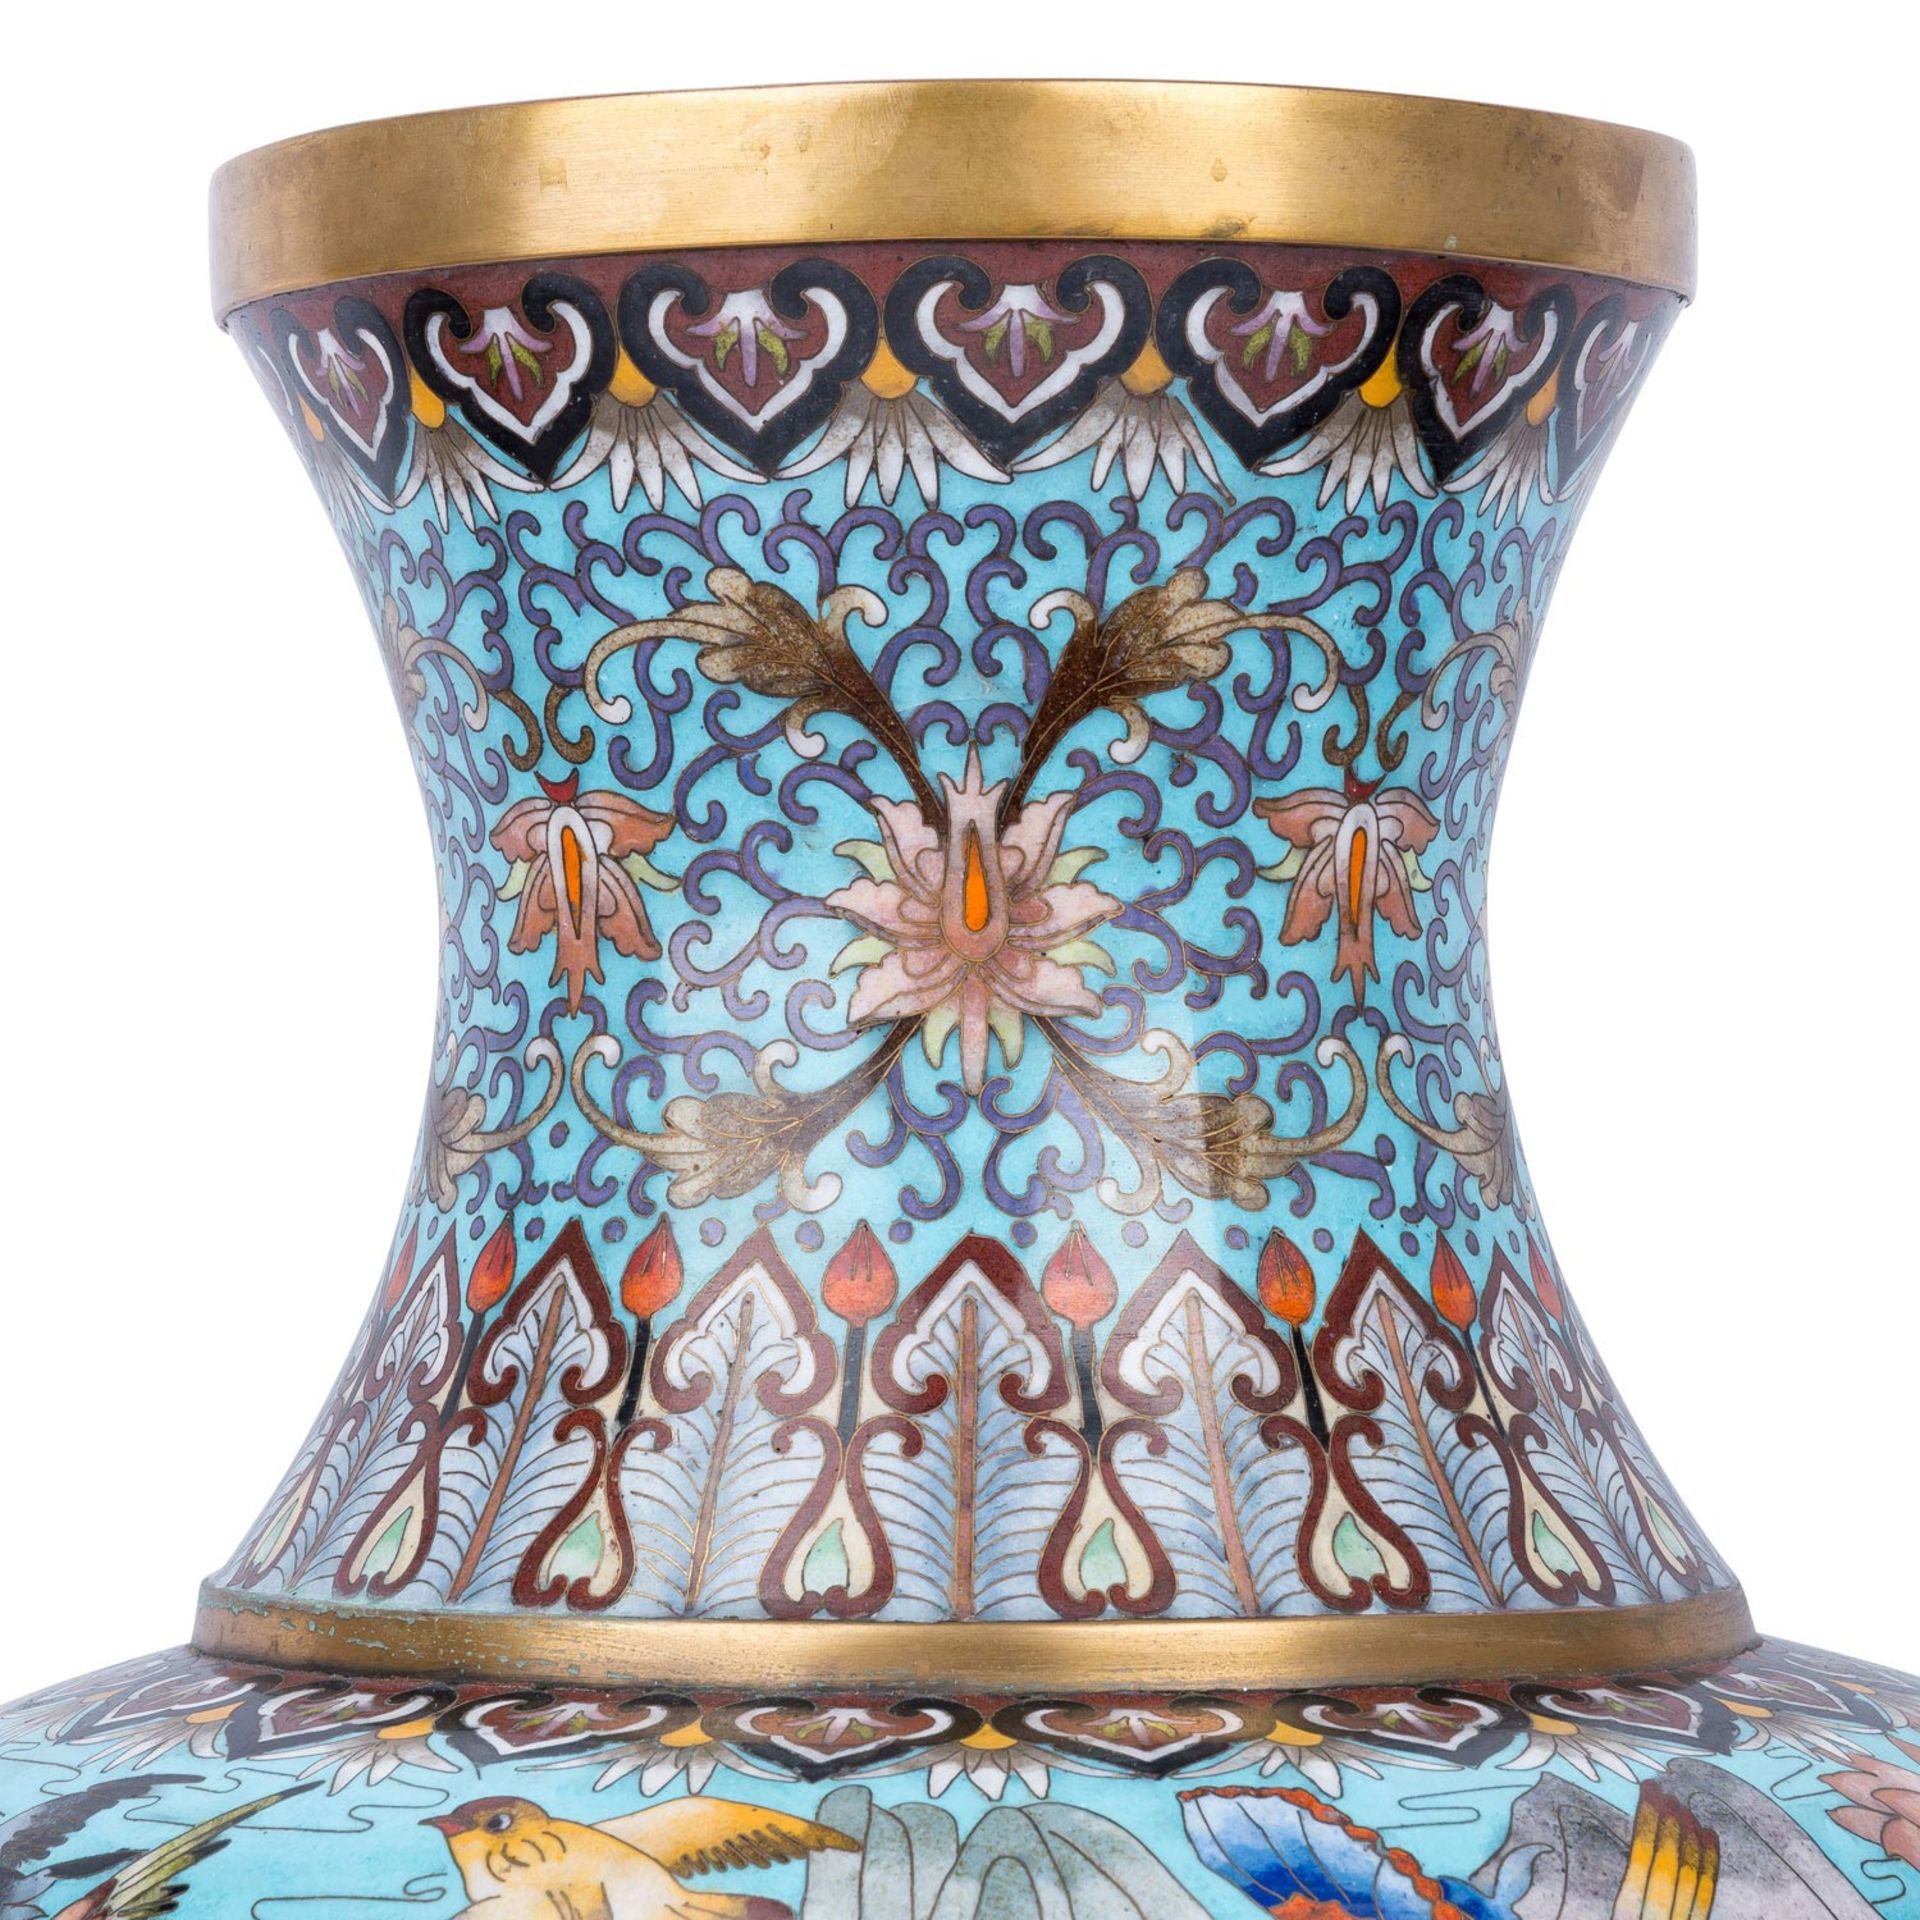 Cloisonné-Bodenvase. CHINA, 20. Jh., - Image 5 of 9